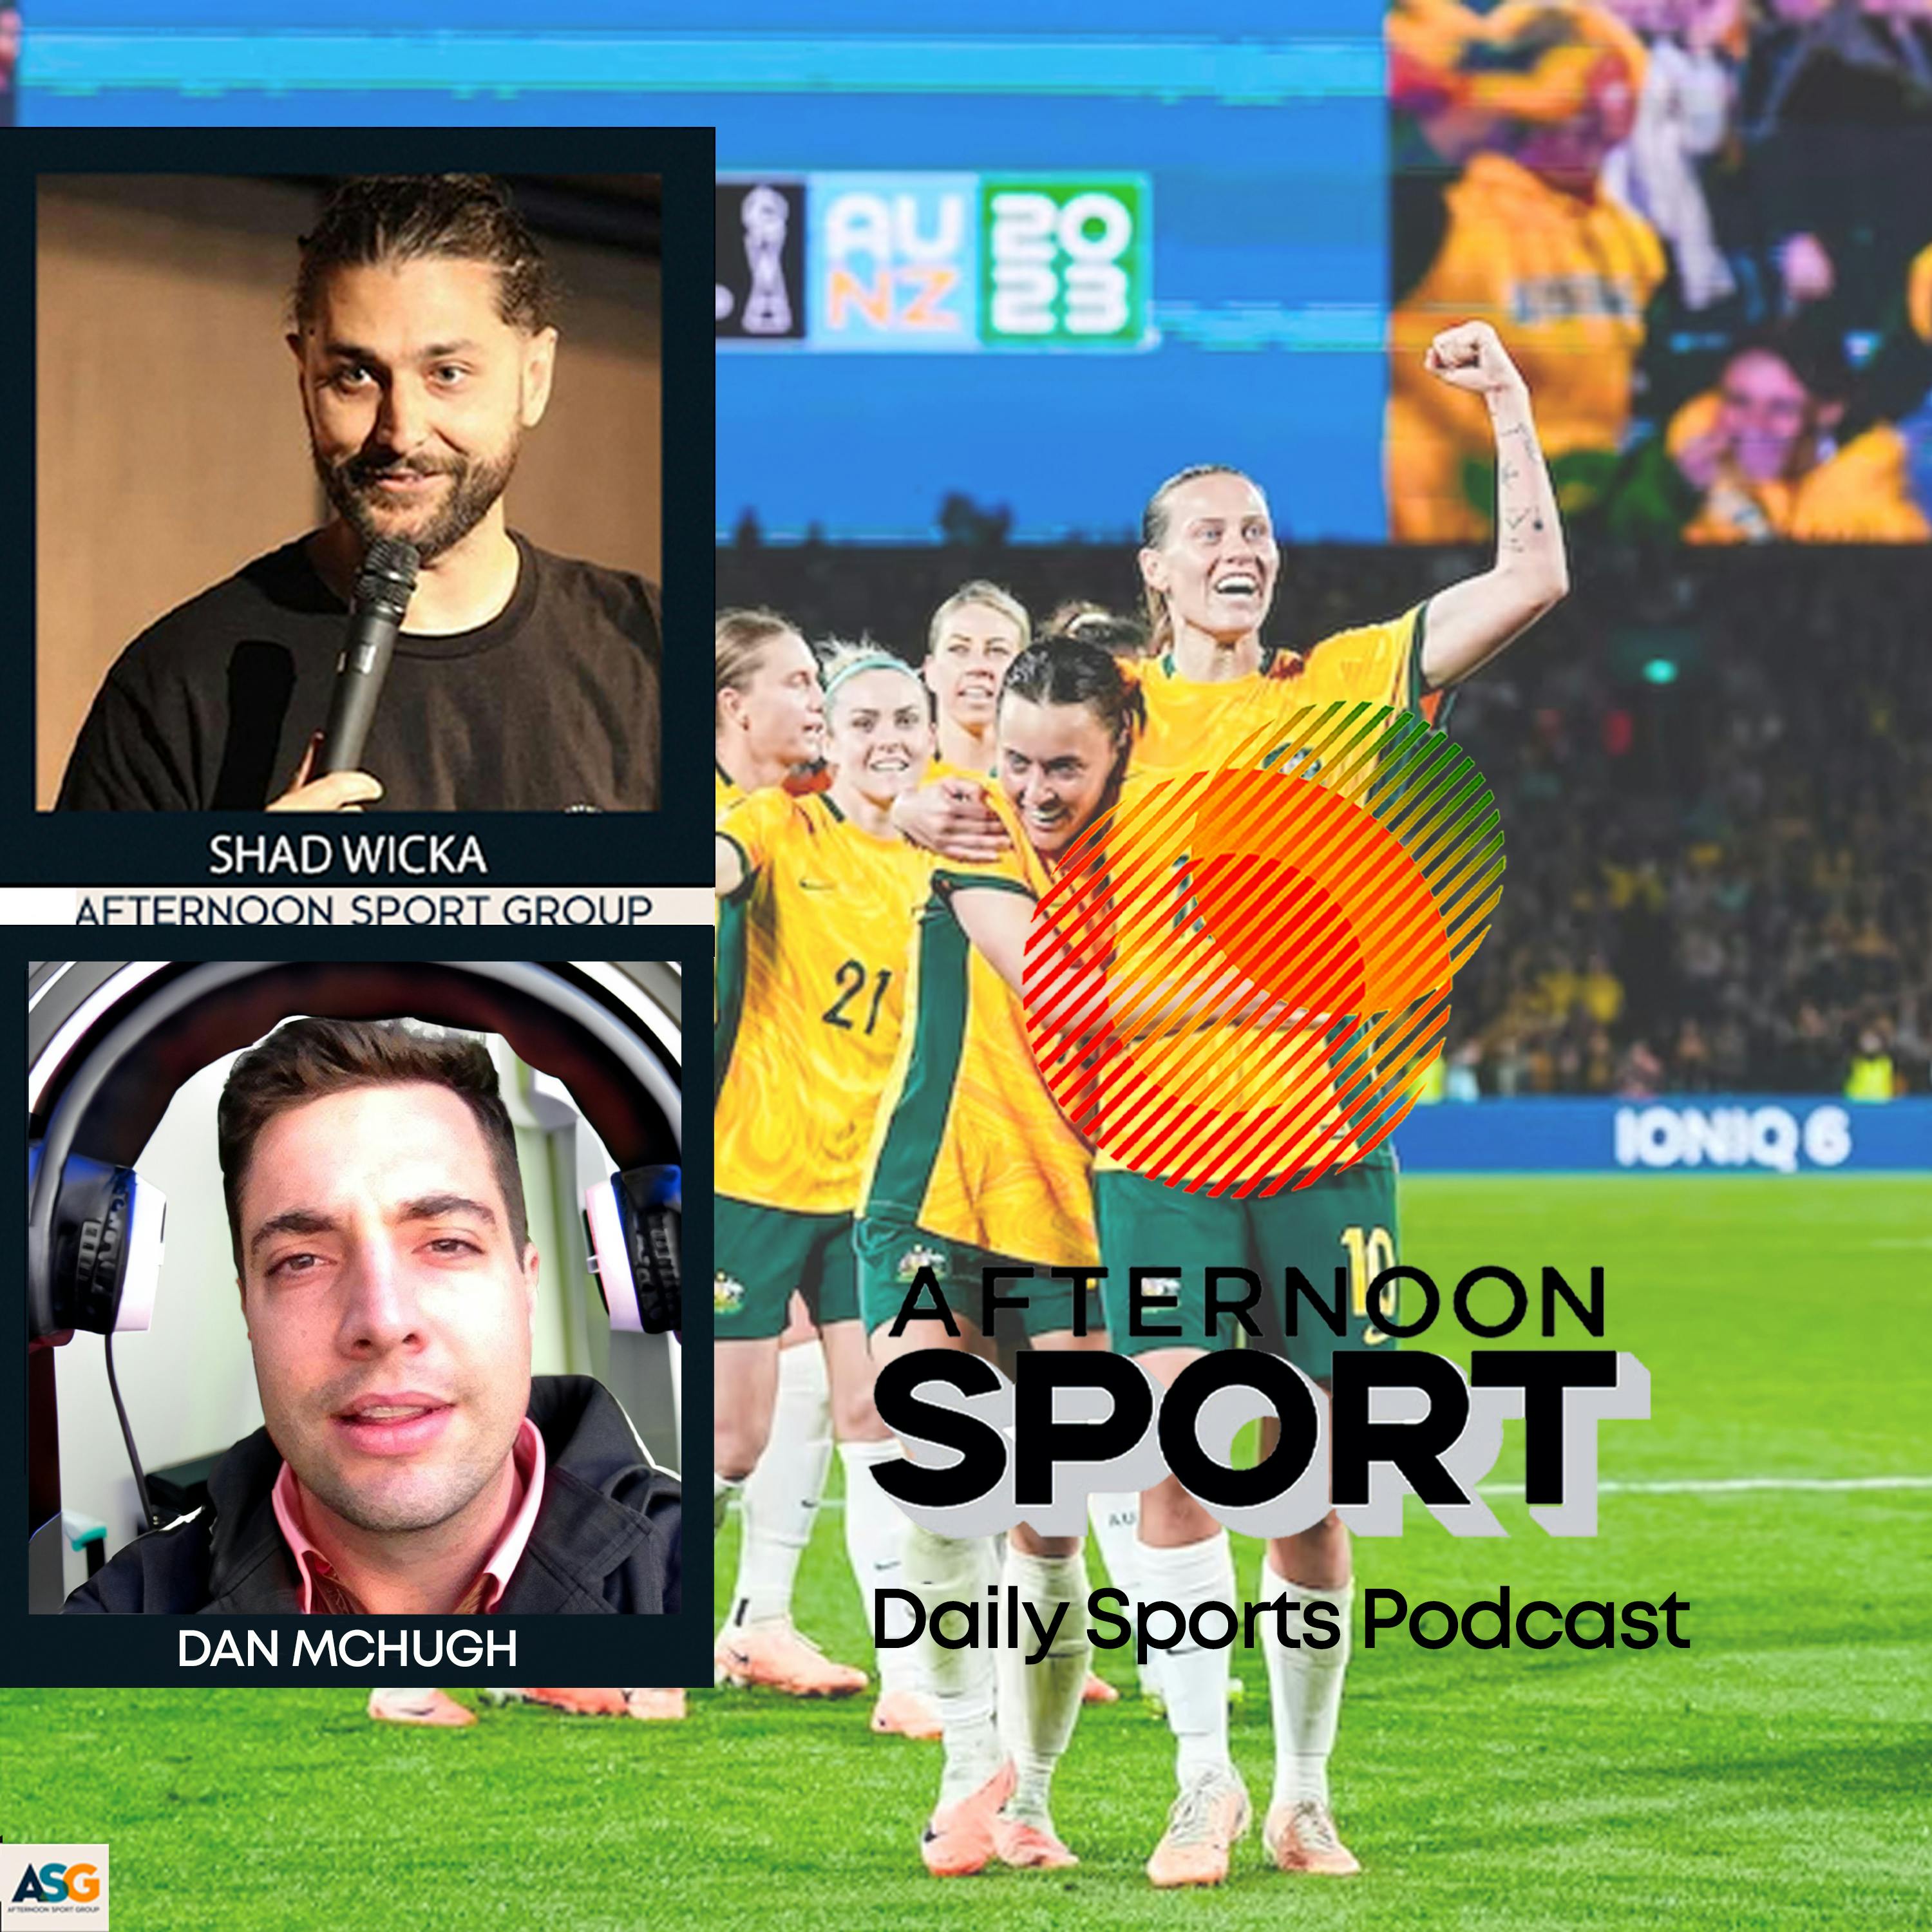 8th August Shad Wicka & Dan McHugh: A win for the Matildas, Diamonds win Netball World Cup, Mitch Marsh named T20 Captain,  Are AFL or NRL fans worse?